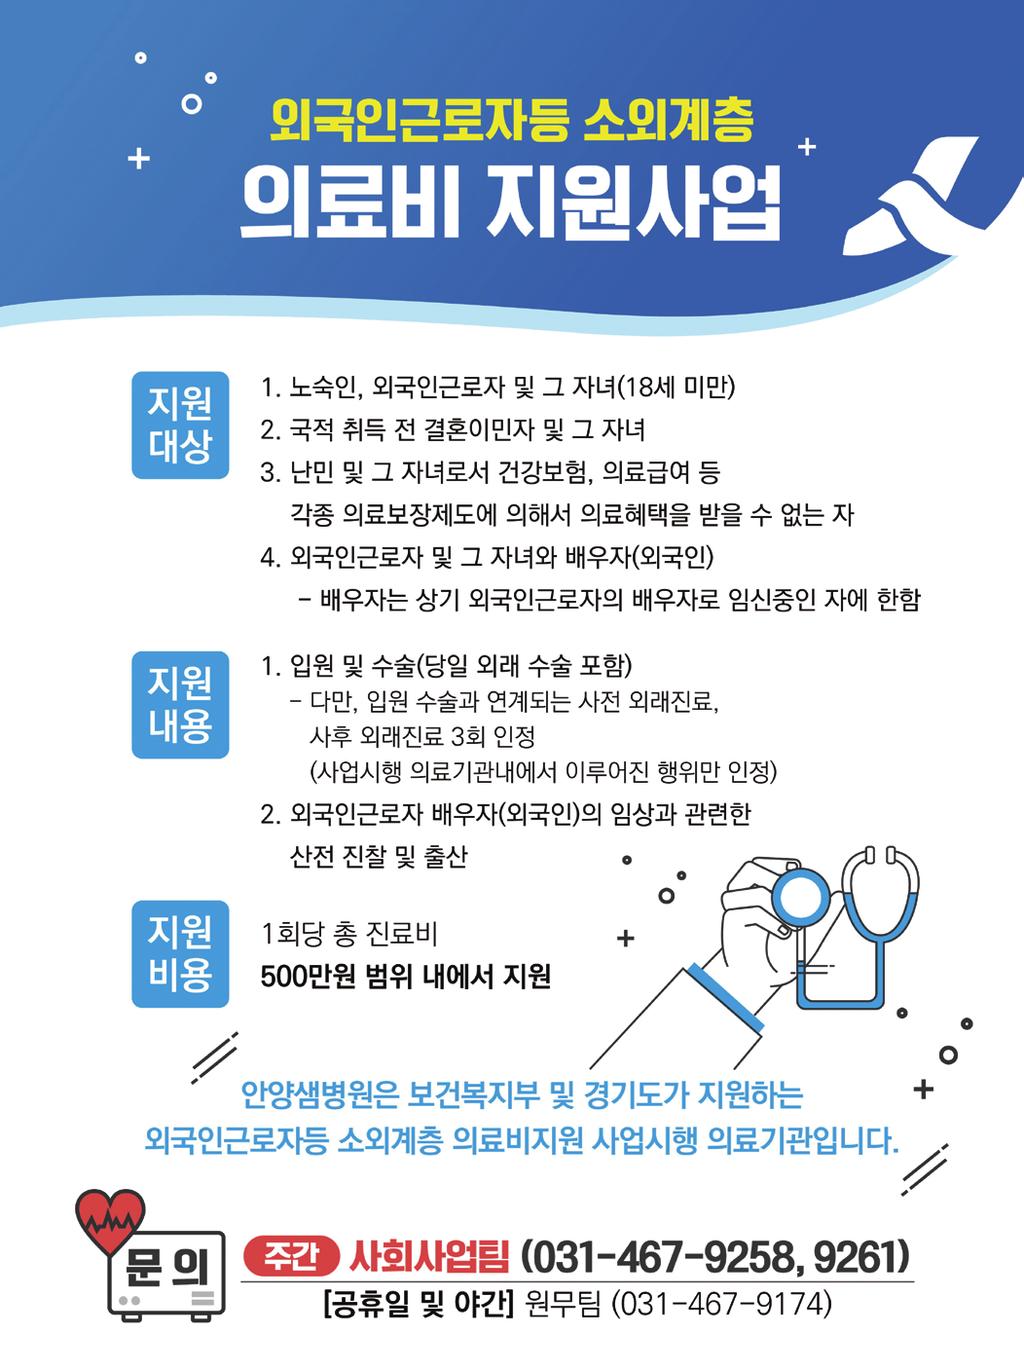 General, Asian-Pacific Postgraduate Course on Gastrointestinal Motility 최은경 9282 호흡기내과 Visiting Fellow, Dept.